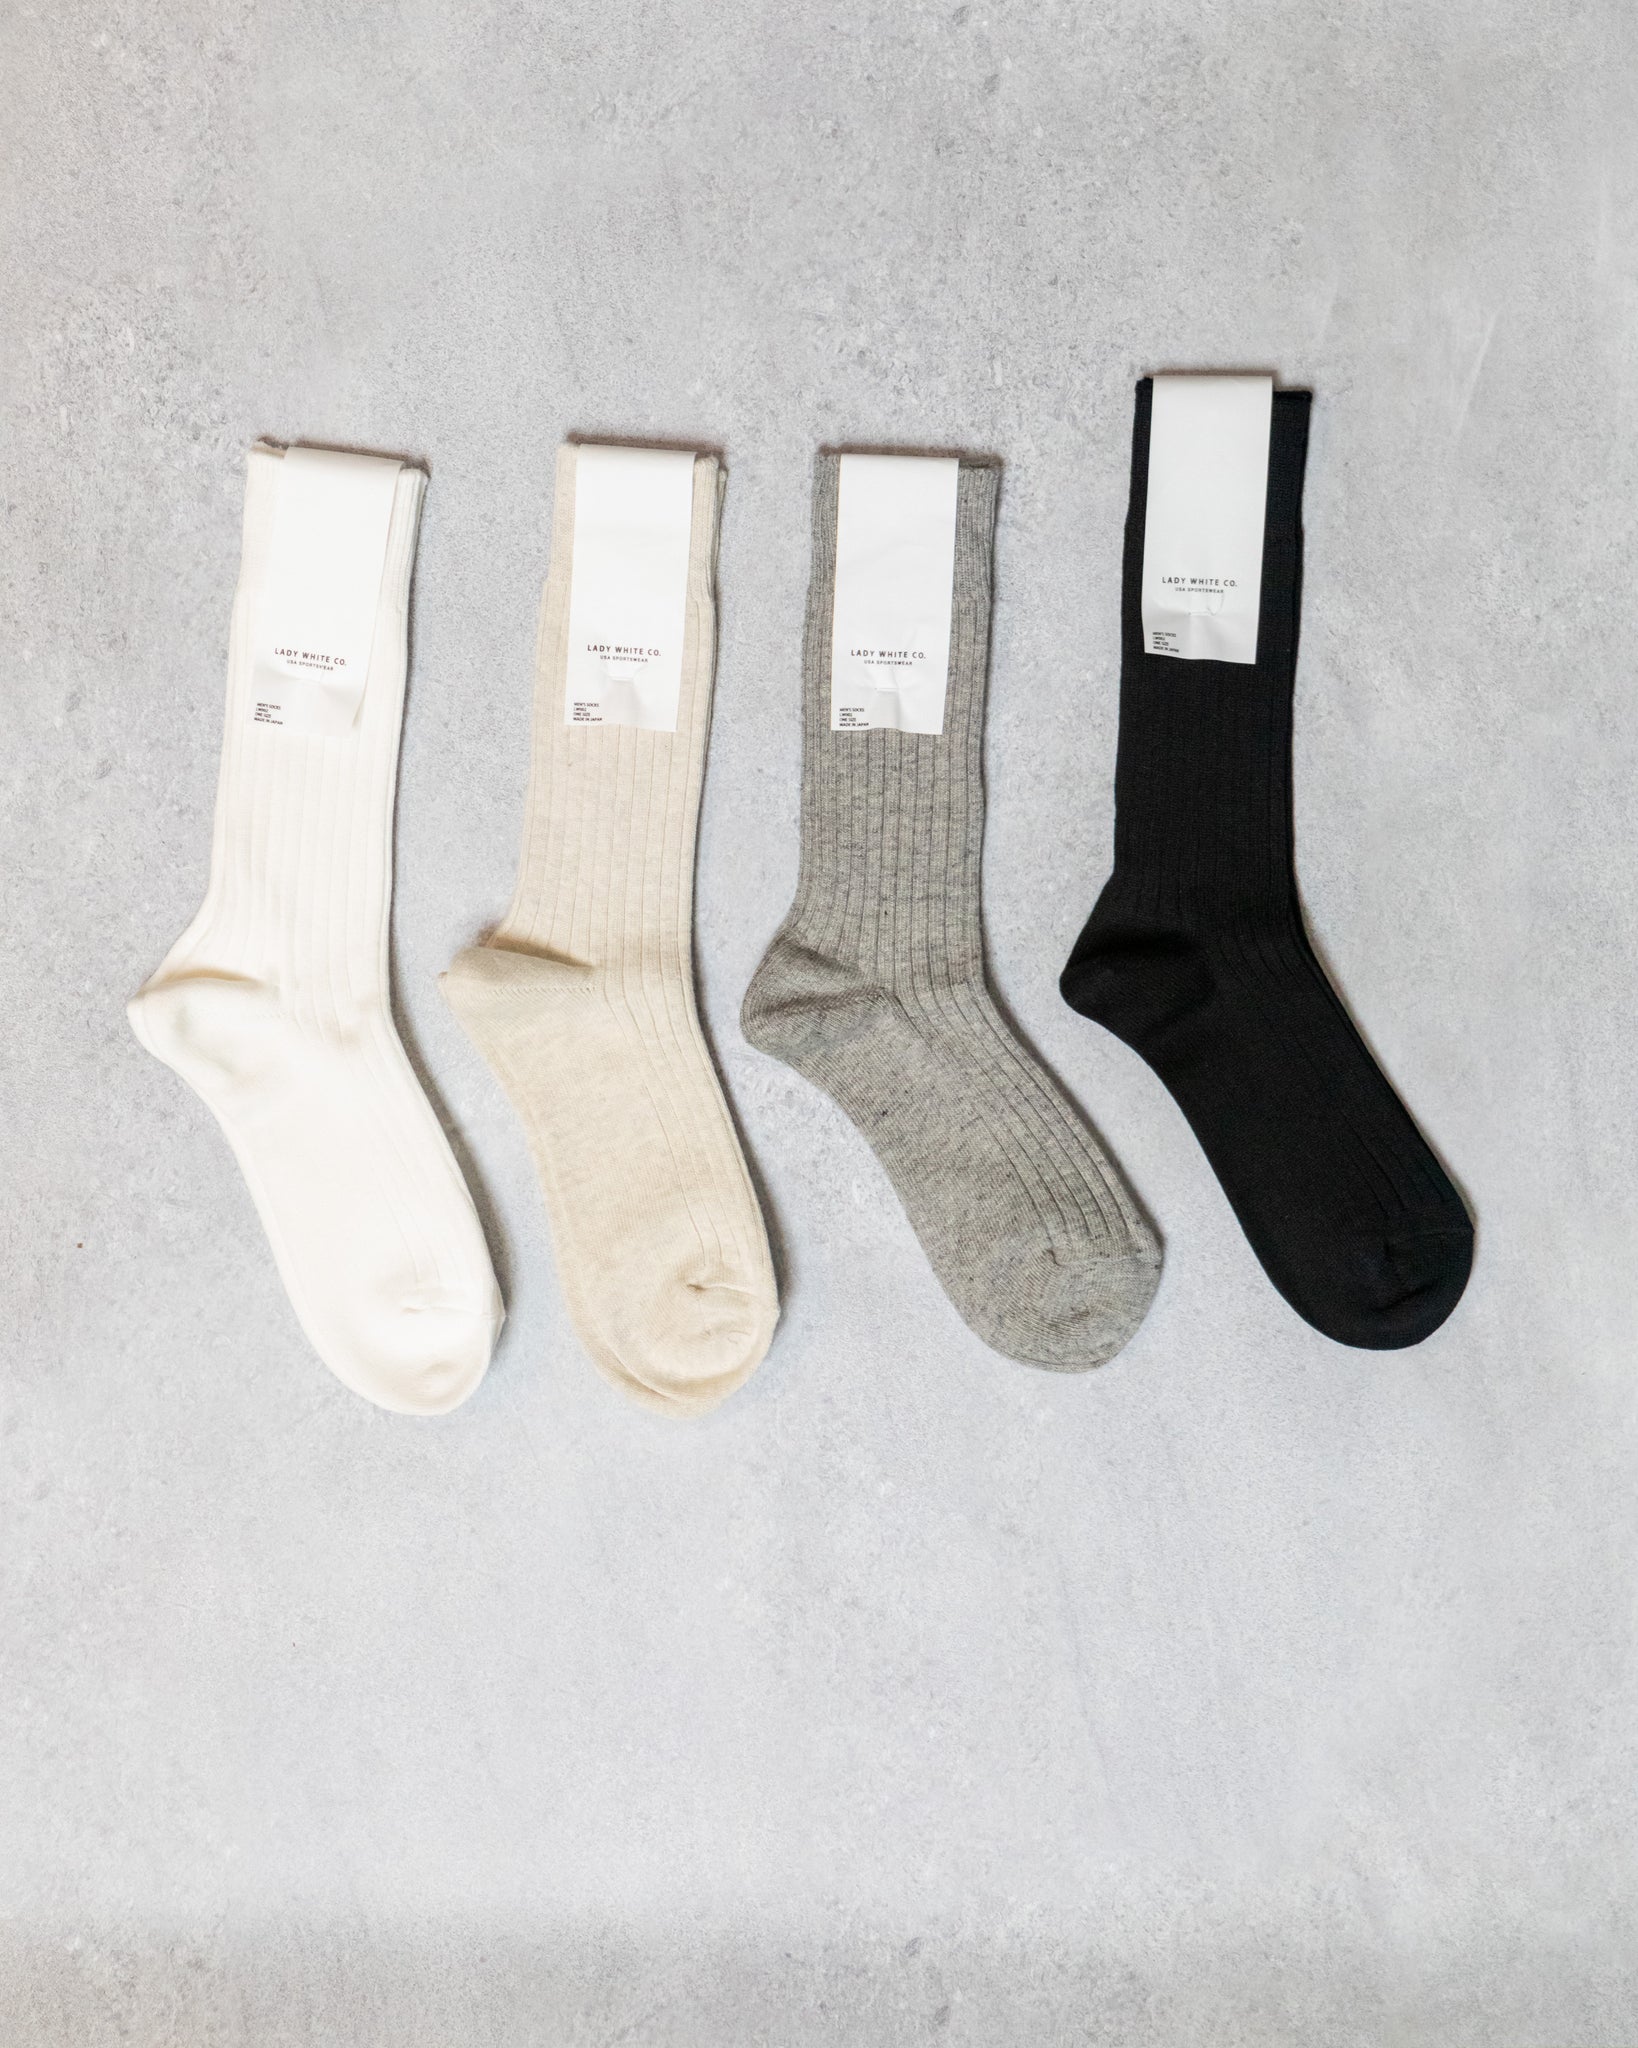 Lady White Super Athletic Socks all four colors